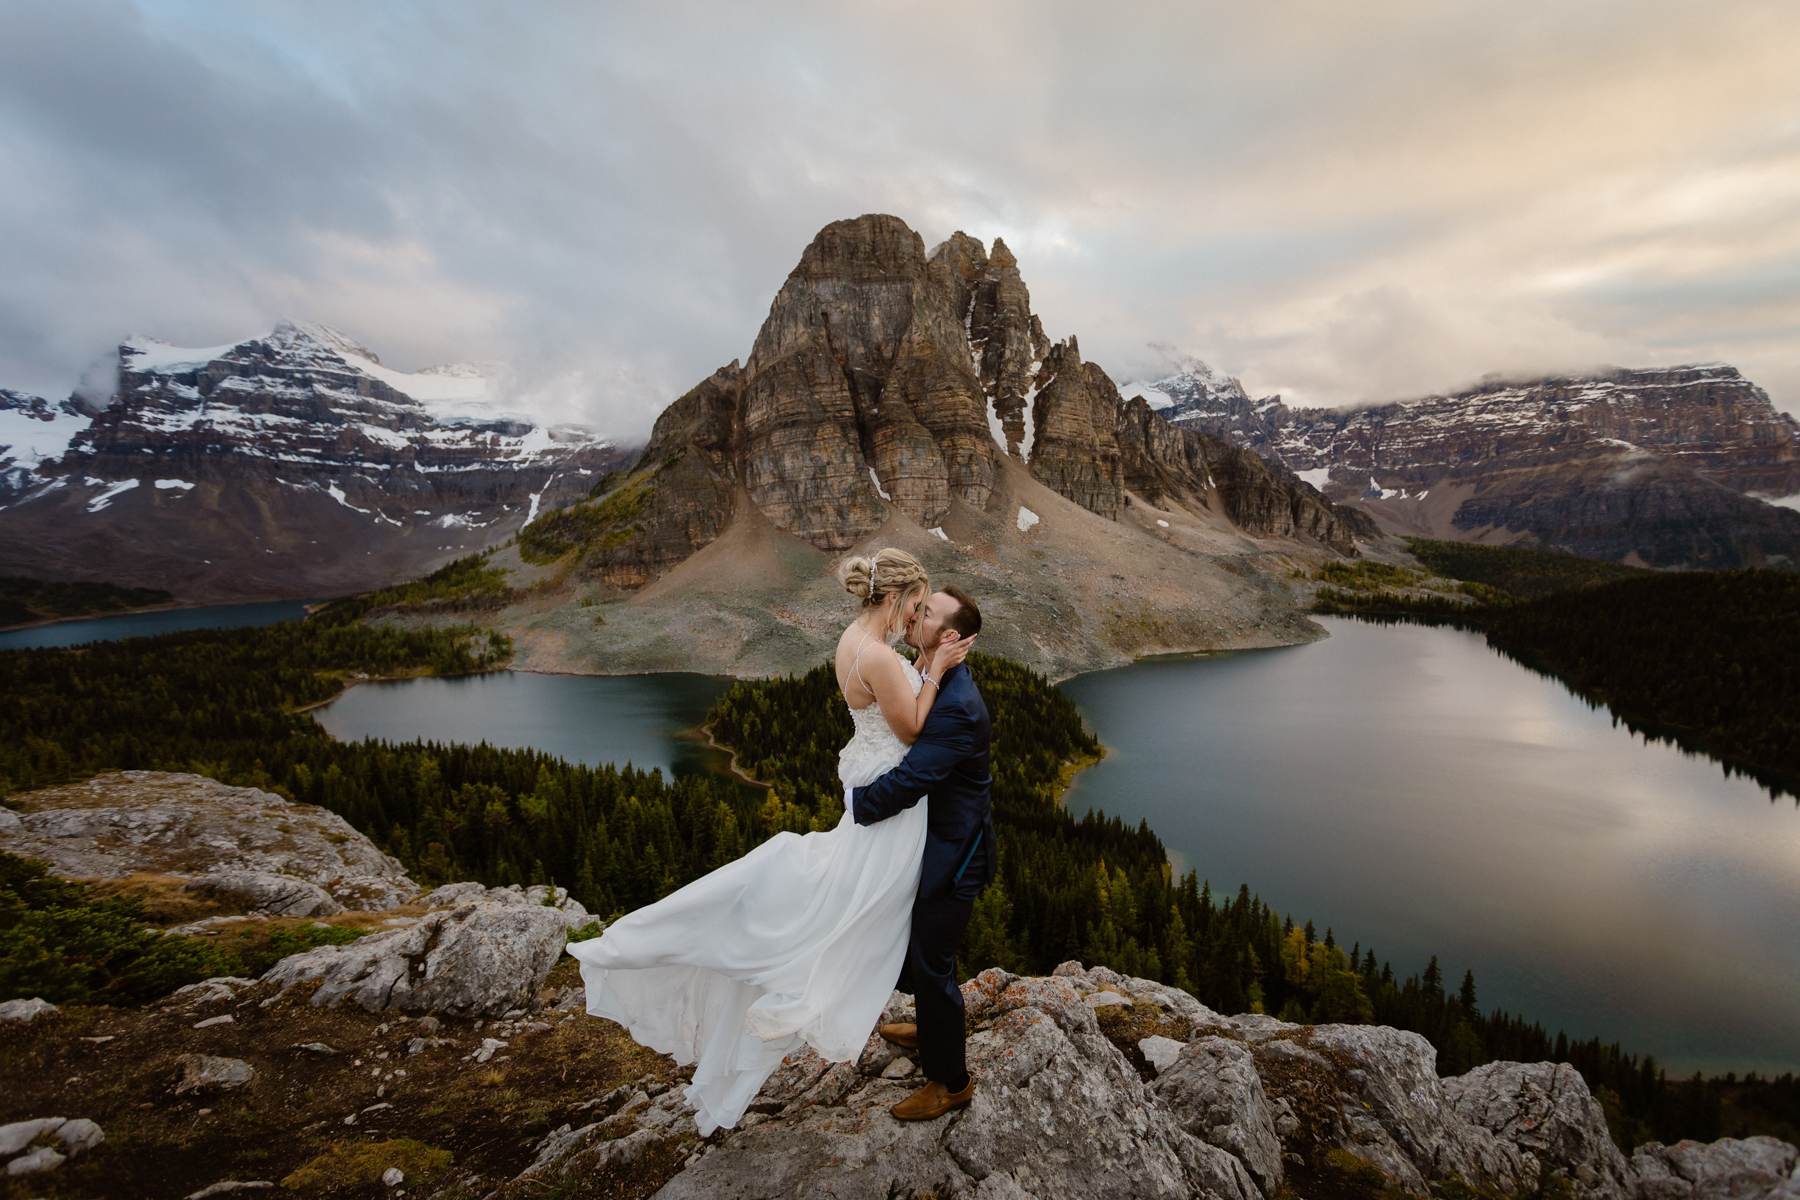 Mount Assiniboine Elopement Photographers at a Backcountry Lodge - Photo 36